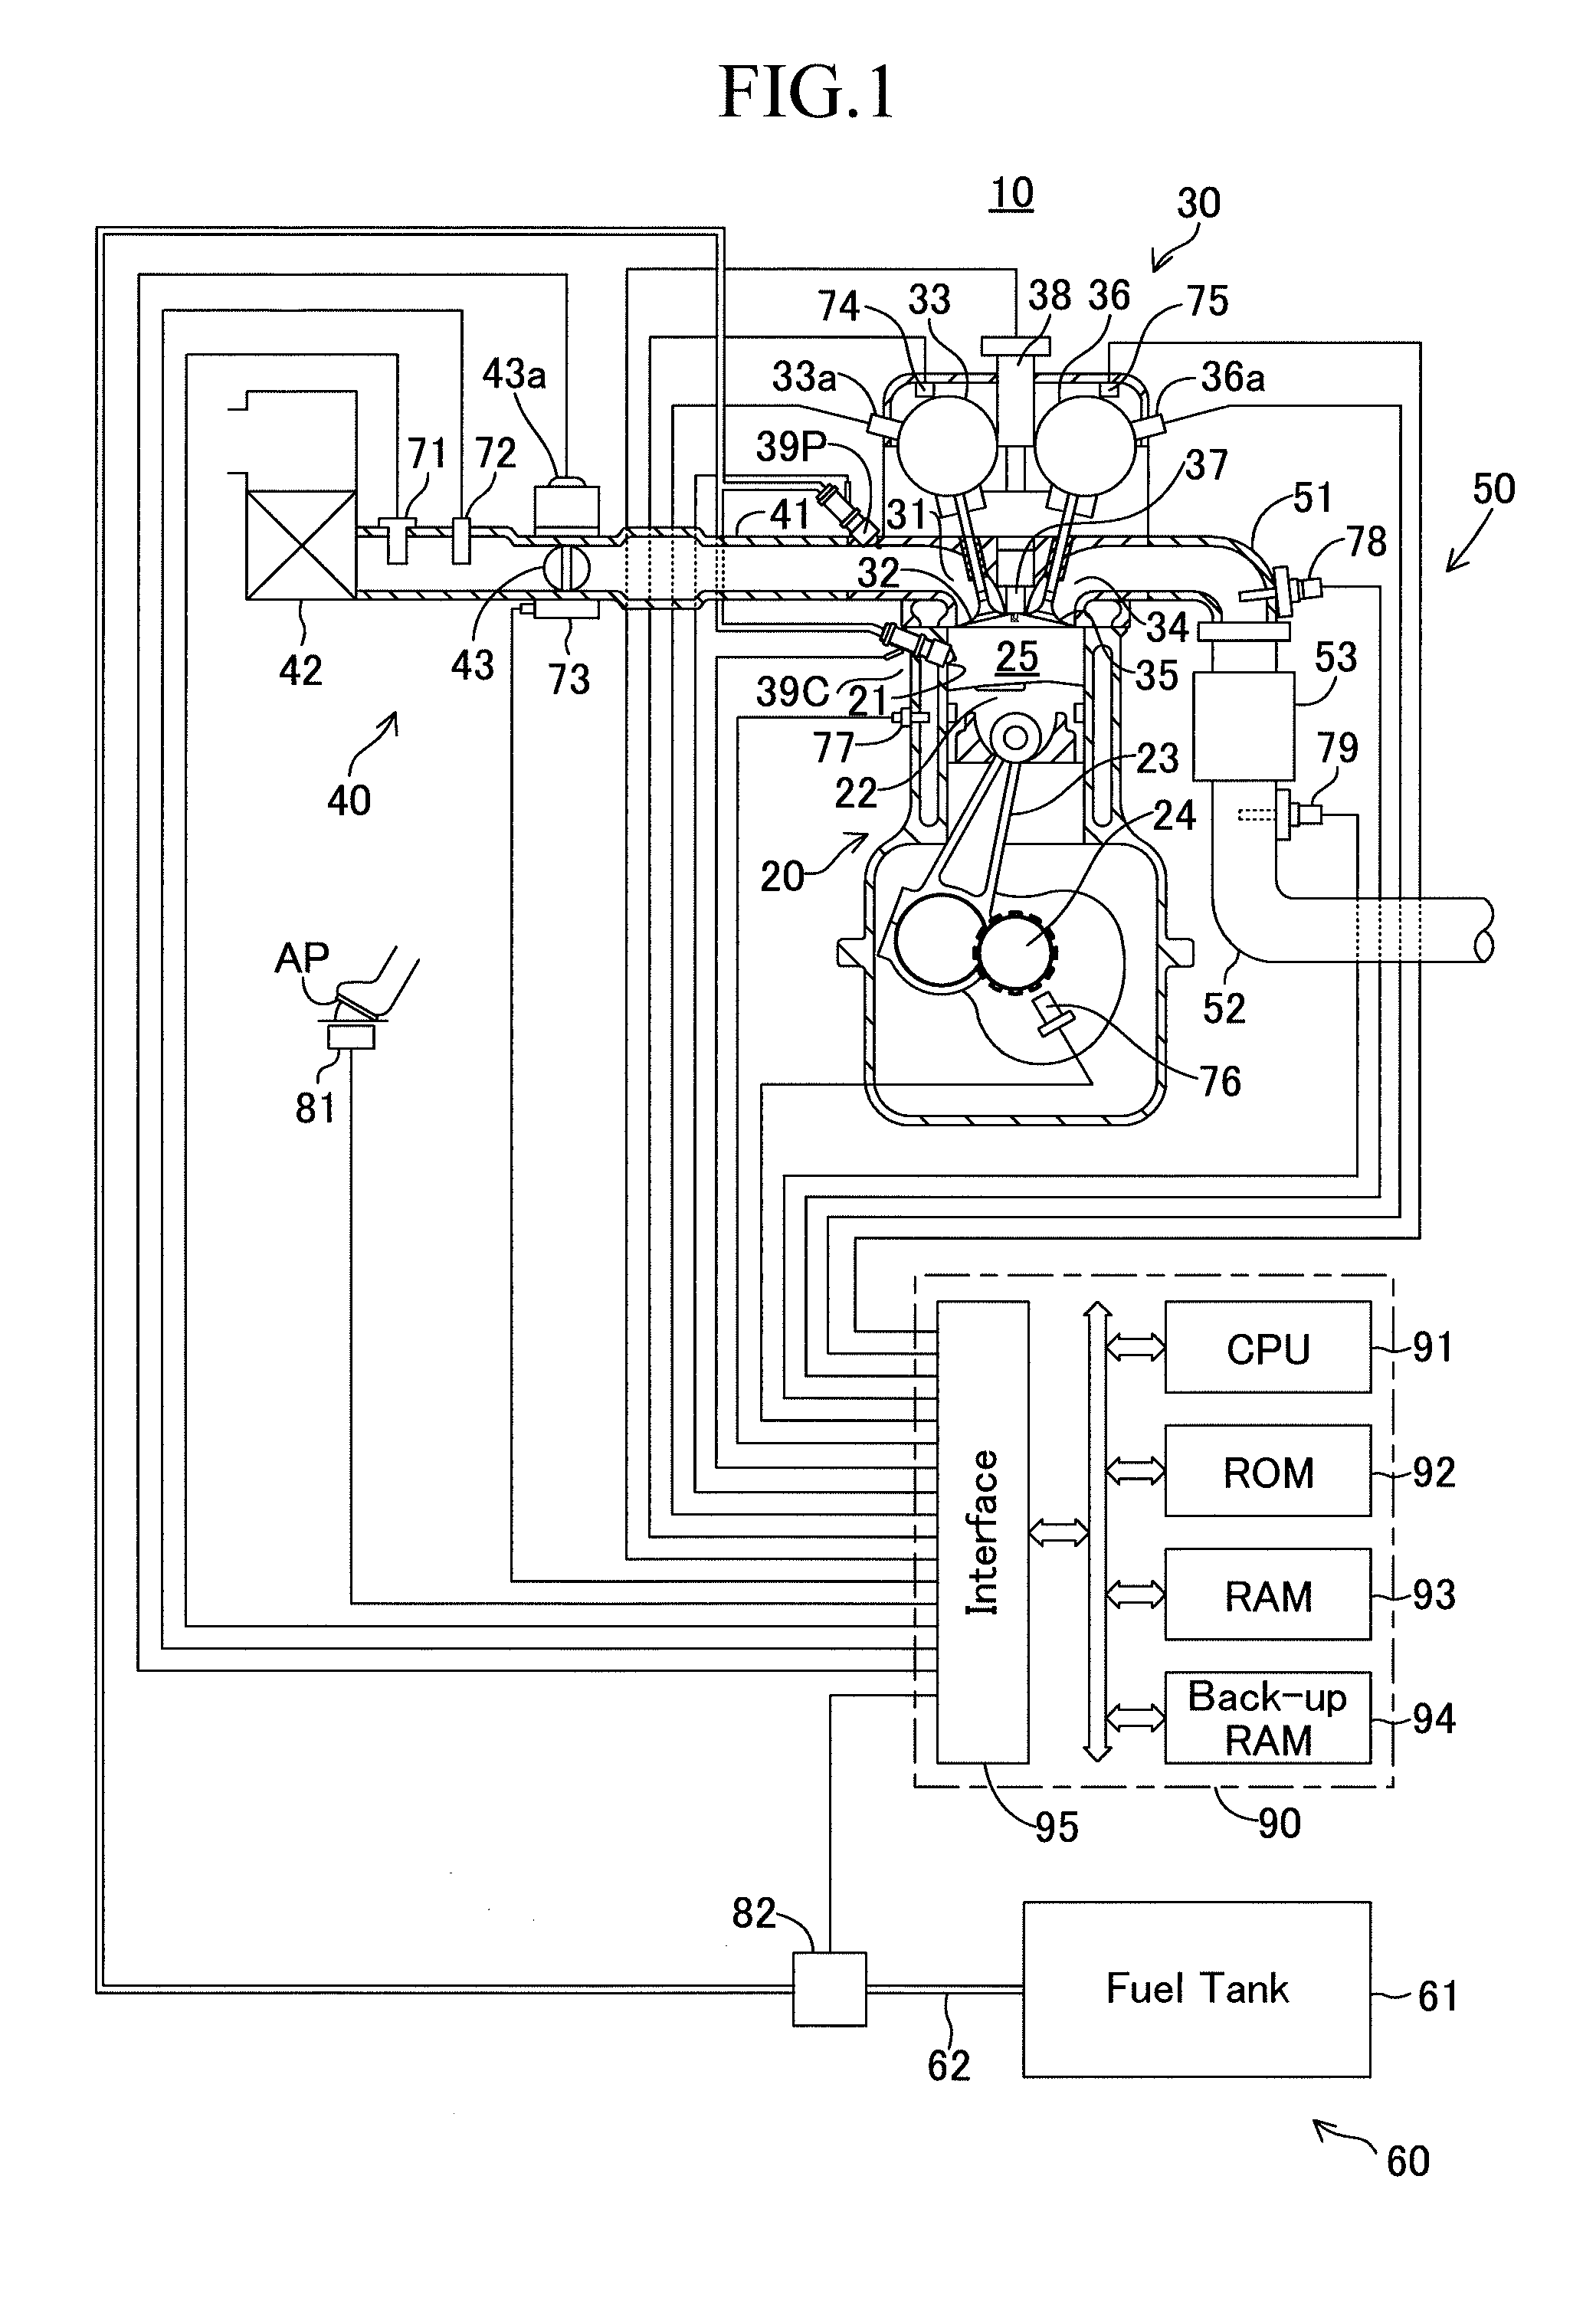 Control device of internal-combustion engine